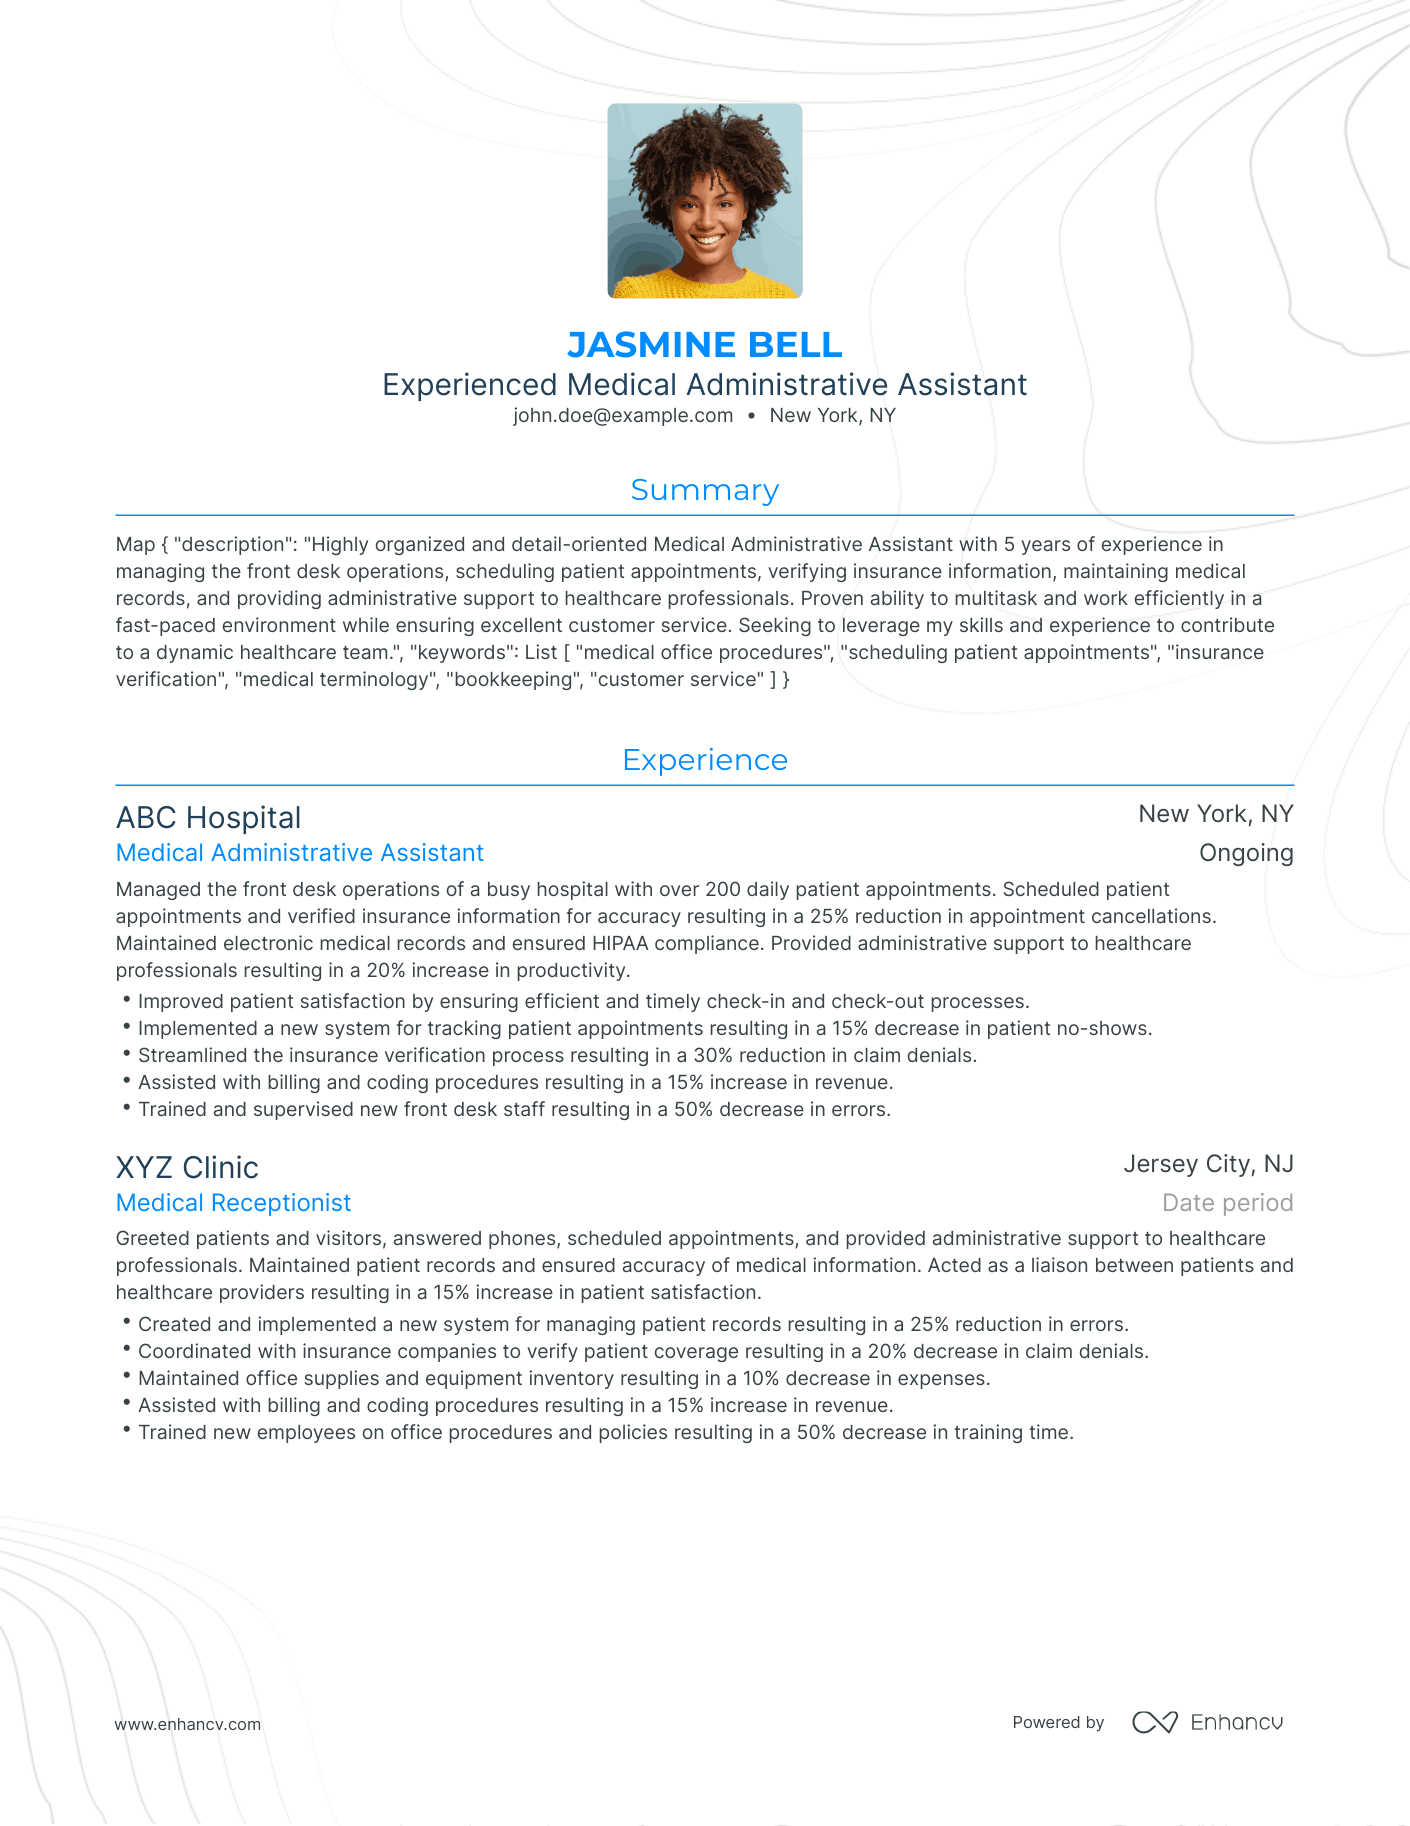 Traditional Medical Administrative Assistant Resume Template